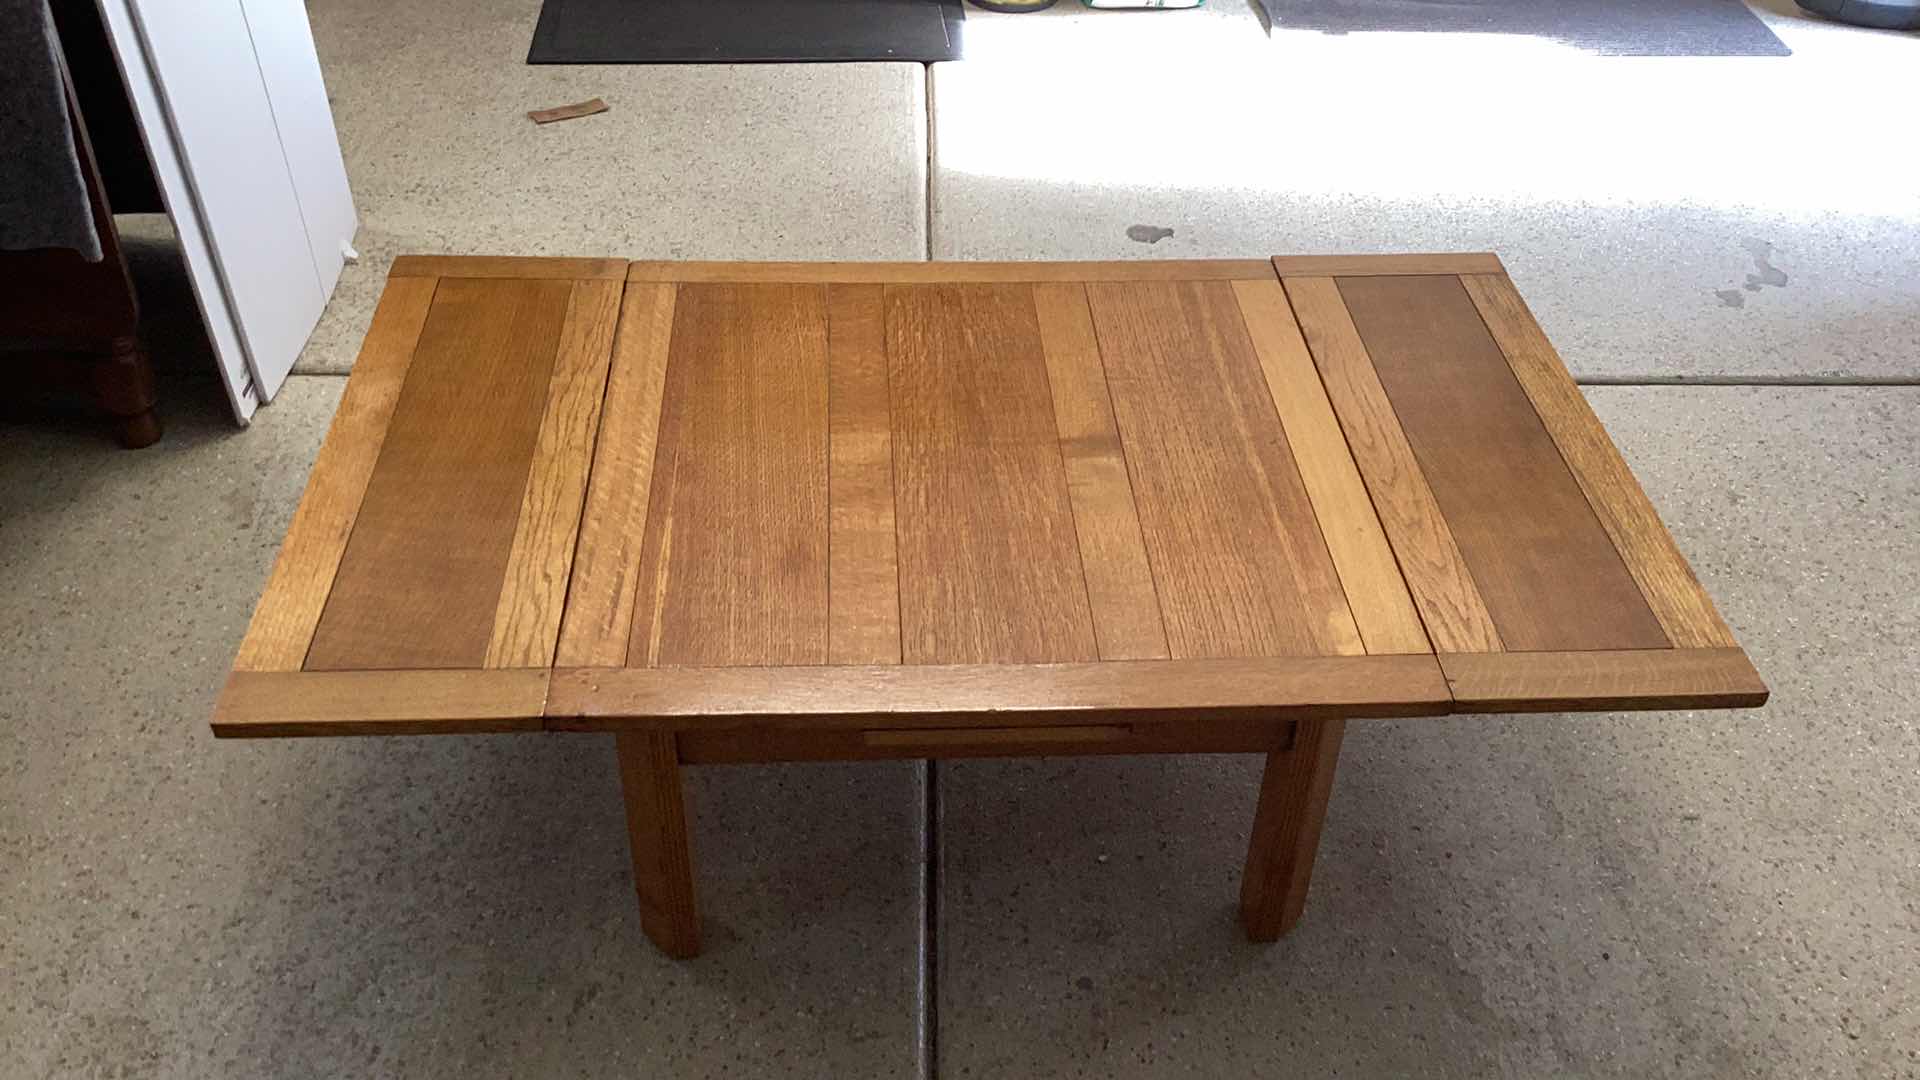 Photo 4 of VINTAGE OAK EXPANDABLE TABLE 33" X 33" H17" EXPANDED SIZE IS 33" X 57" H17"